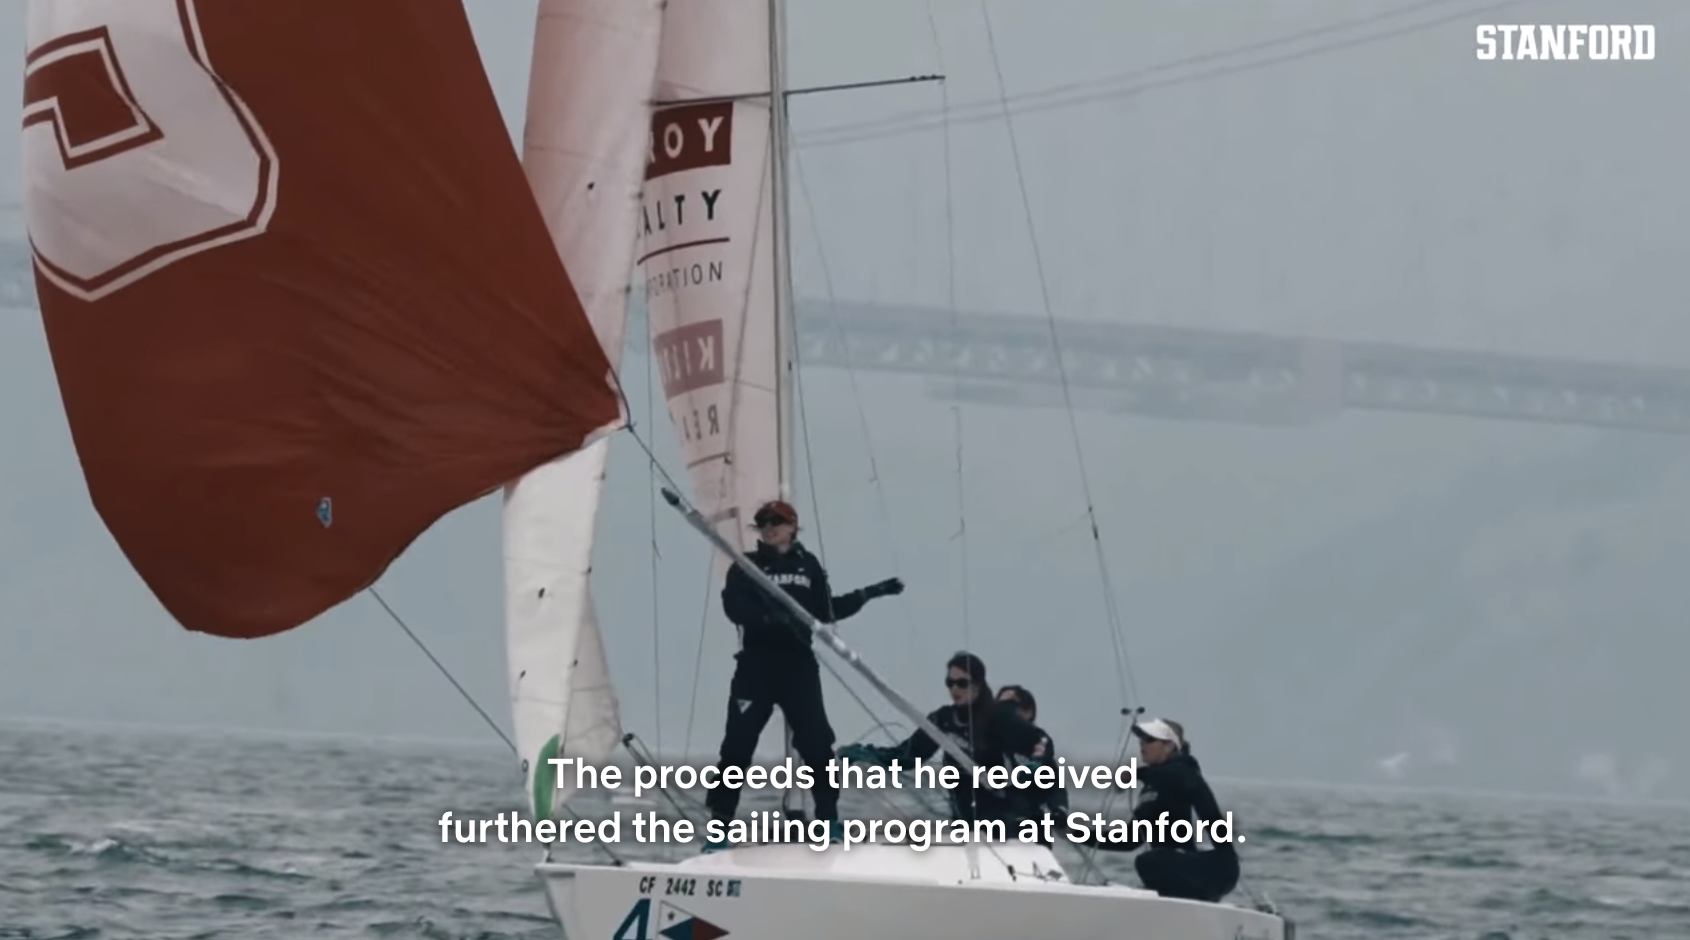 A video of the USC sailing team